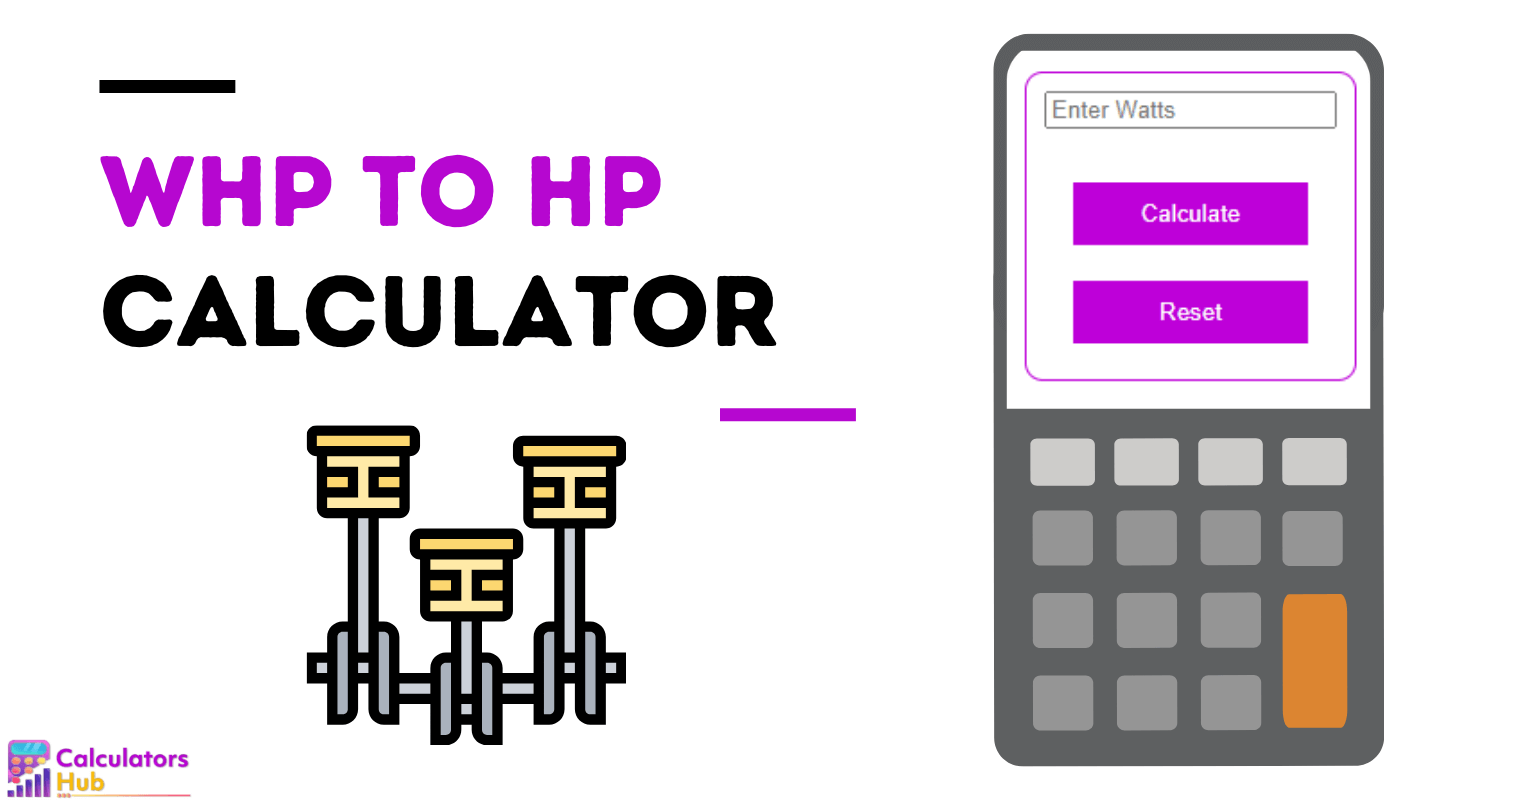 Whp to hp Calculator